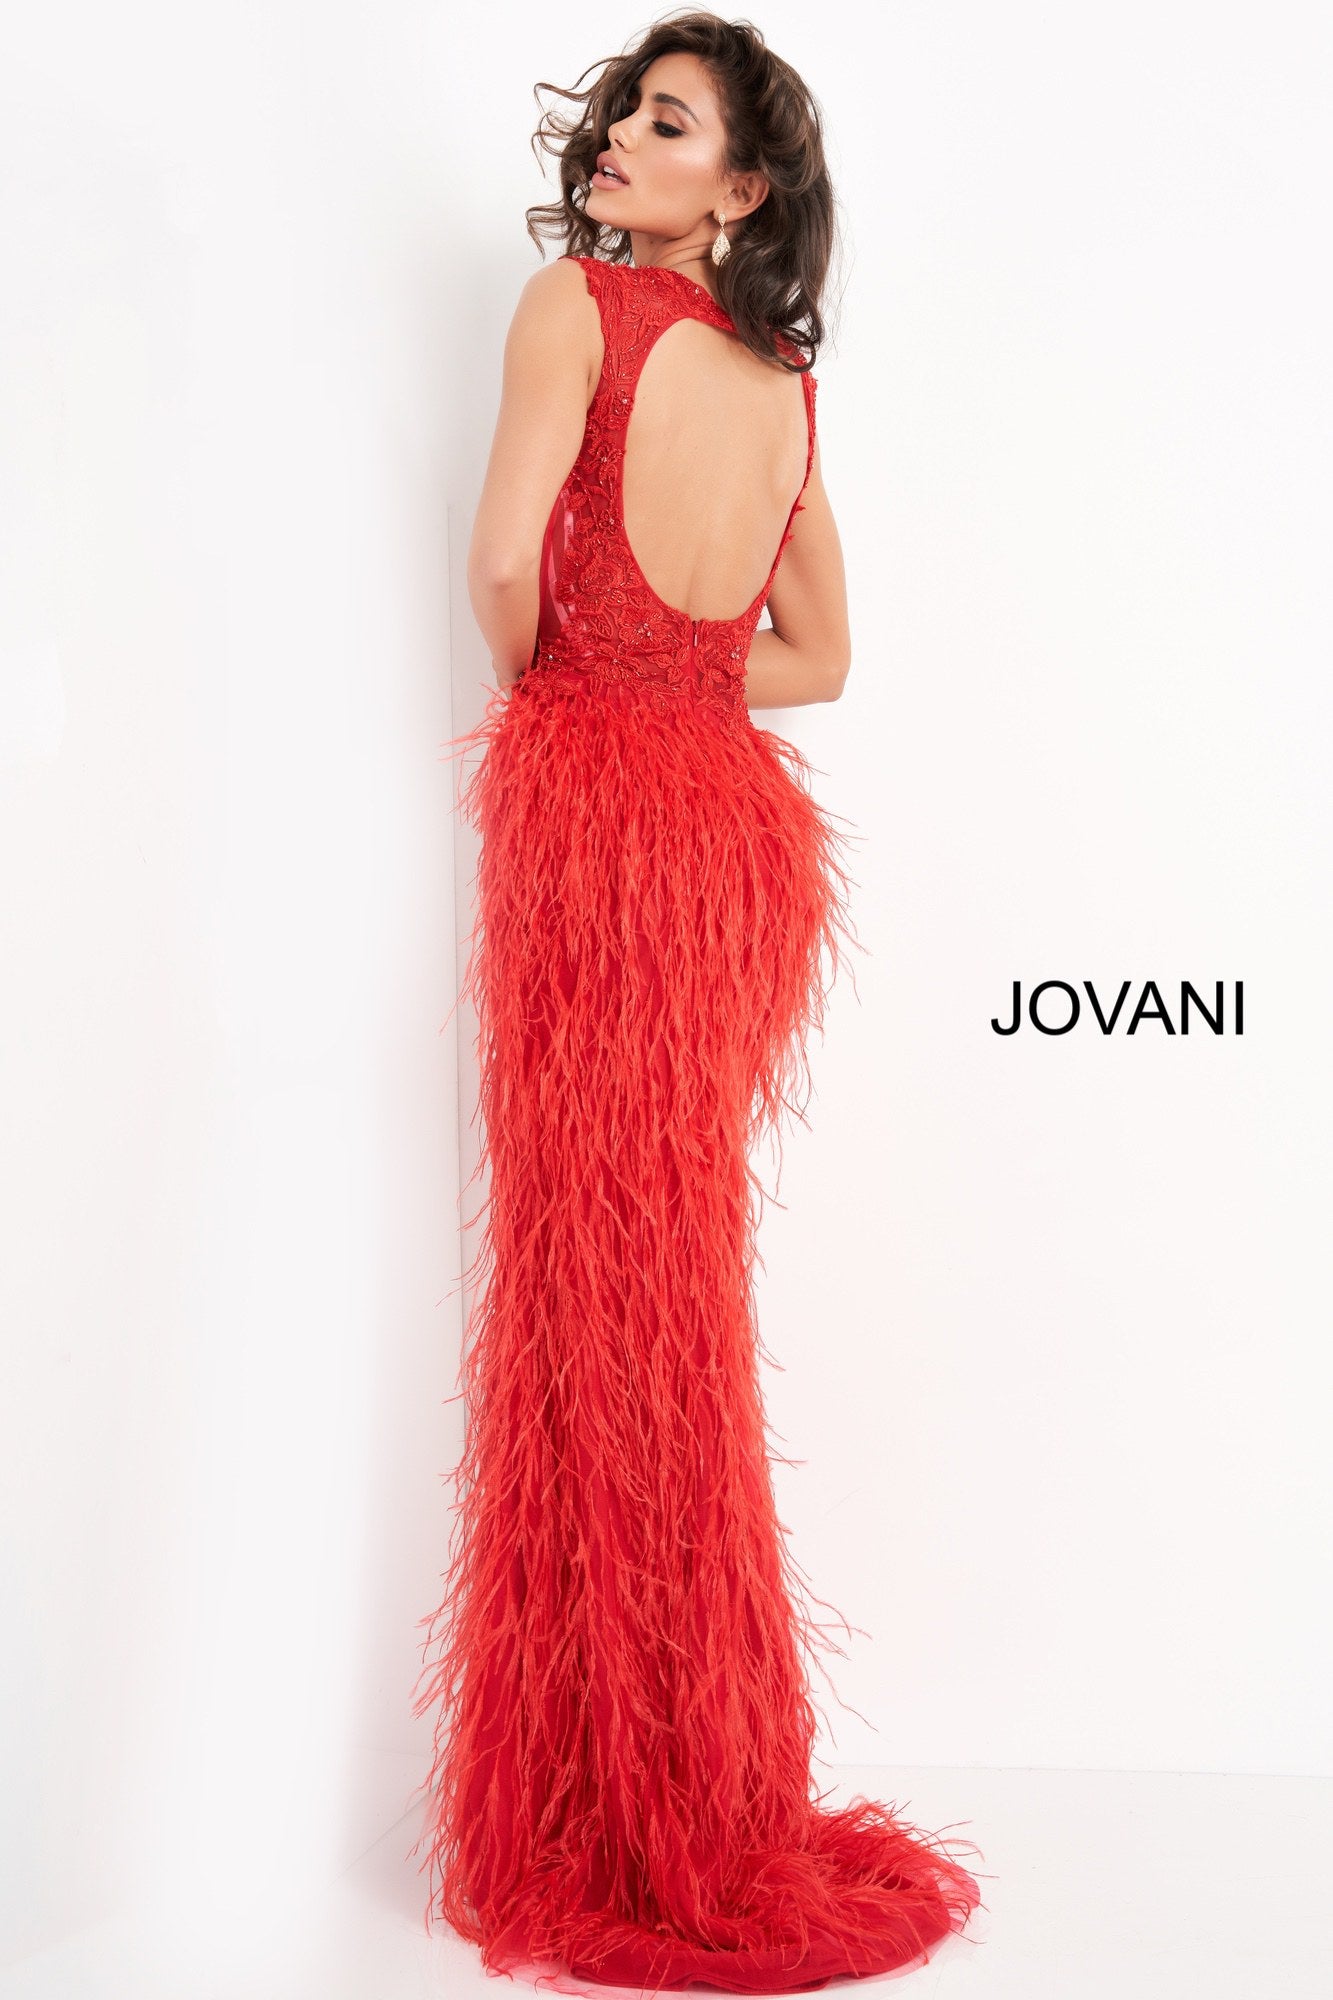 Jovani 06446 is a Gorgeous Red Carpet Ready Formal wear style! Featuring a fitted Plunging V Neck sheer lace embellished bodice with cap sleeves. Lush feather accented skirt with slit and sweeping train. This Prom Dress Features a backless cutout sheer back. Perfect pageant gown. Available Sizes: 00,0,2,4,6,8,10,12,14,16,18,20,22,24  Available Colors: BLUSH, LIGHT-BLUE, OFF-WHITE, RED